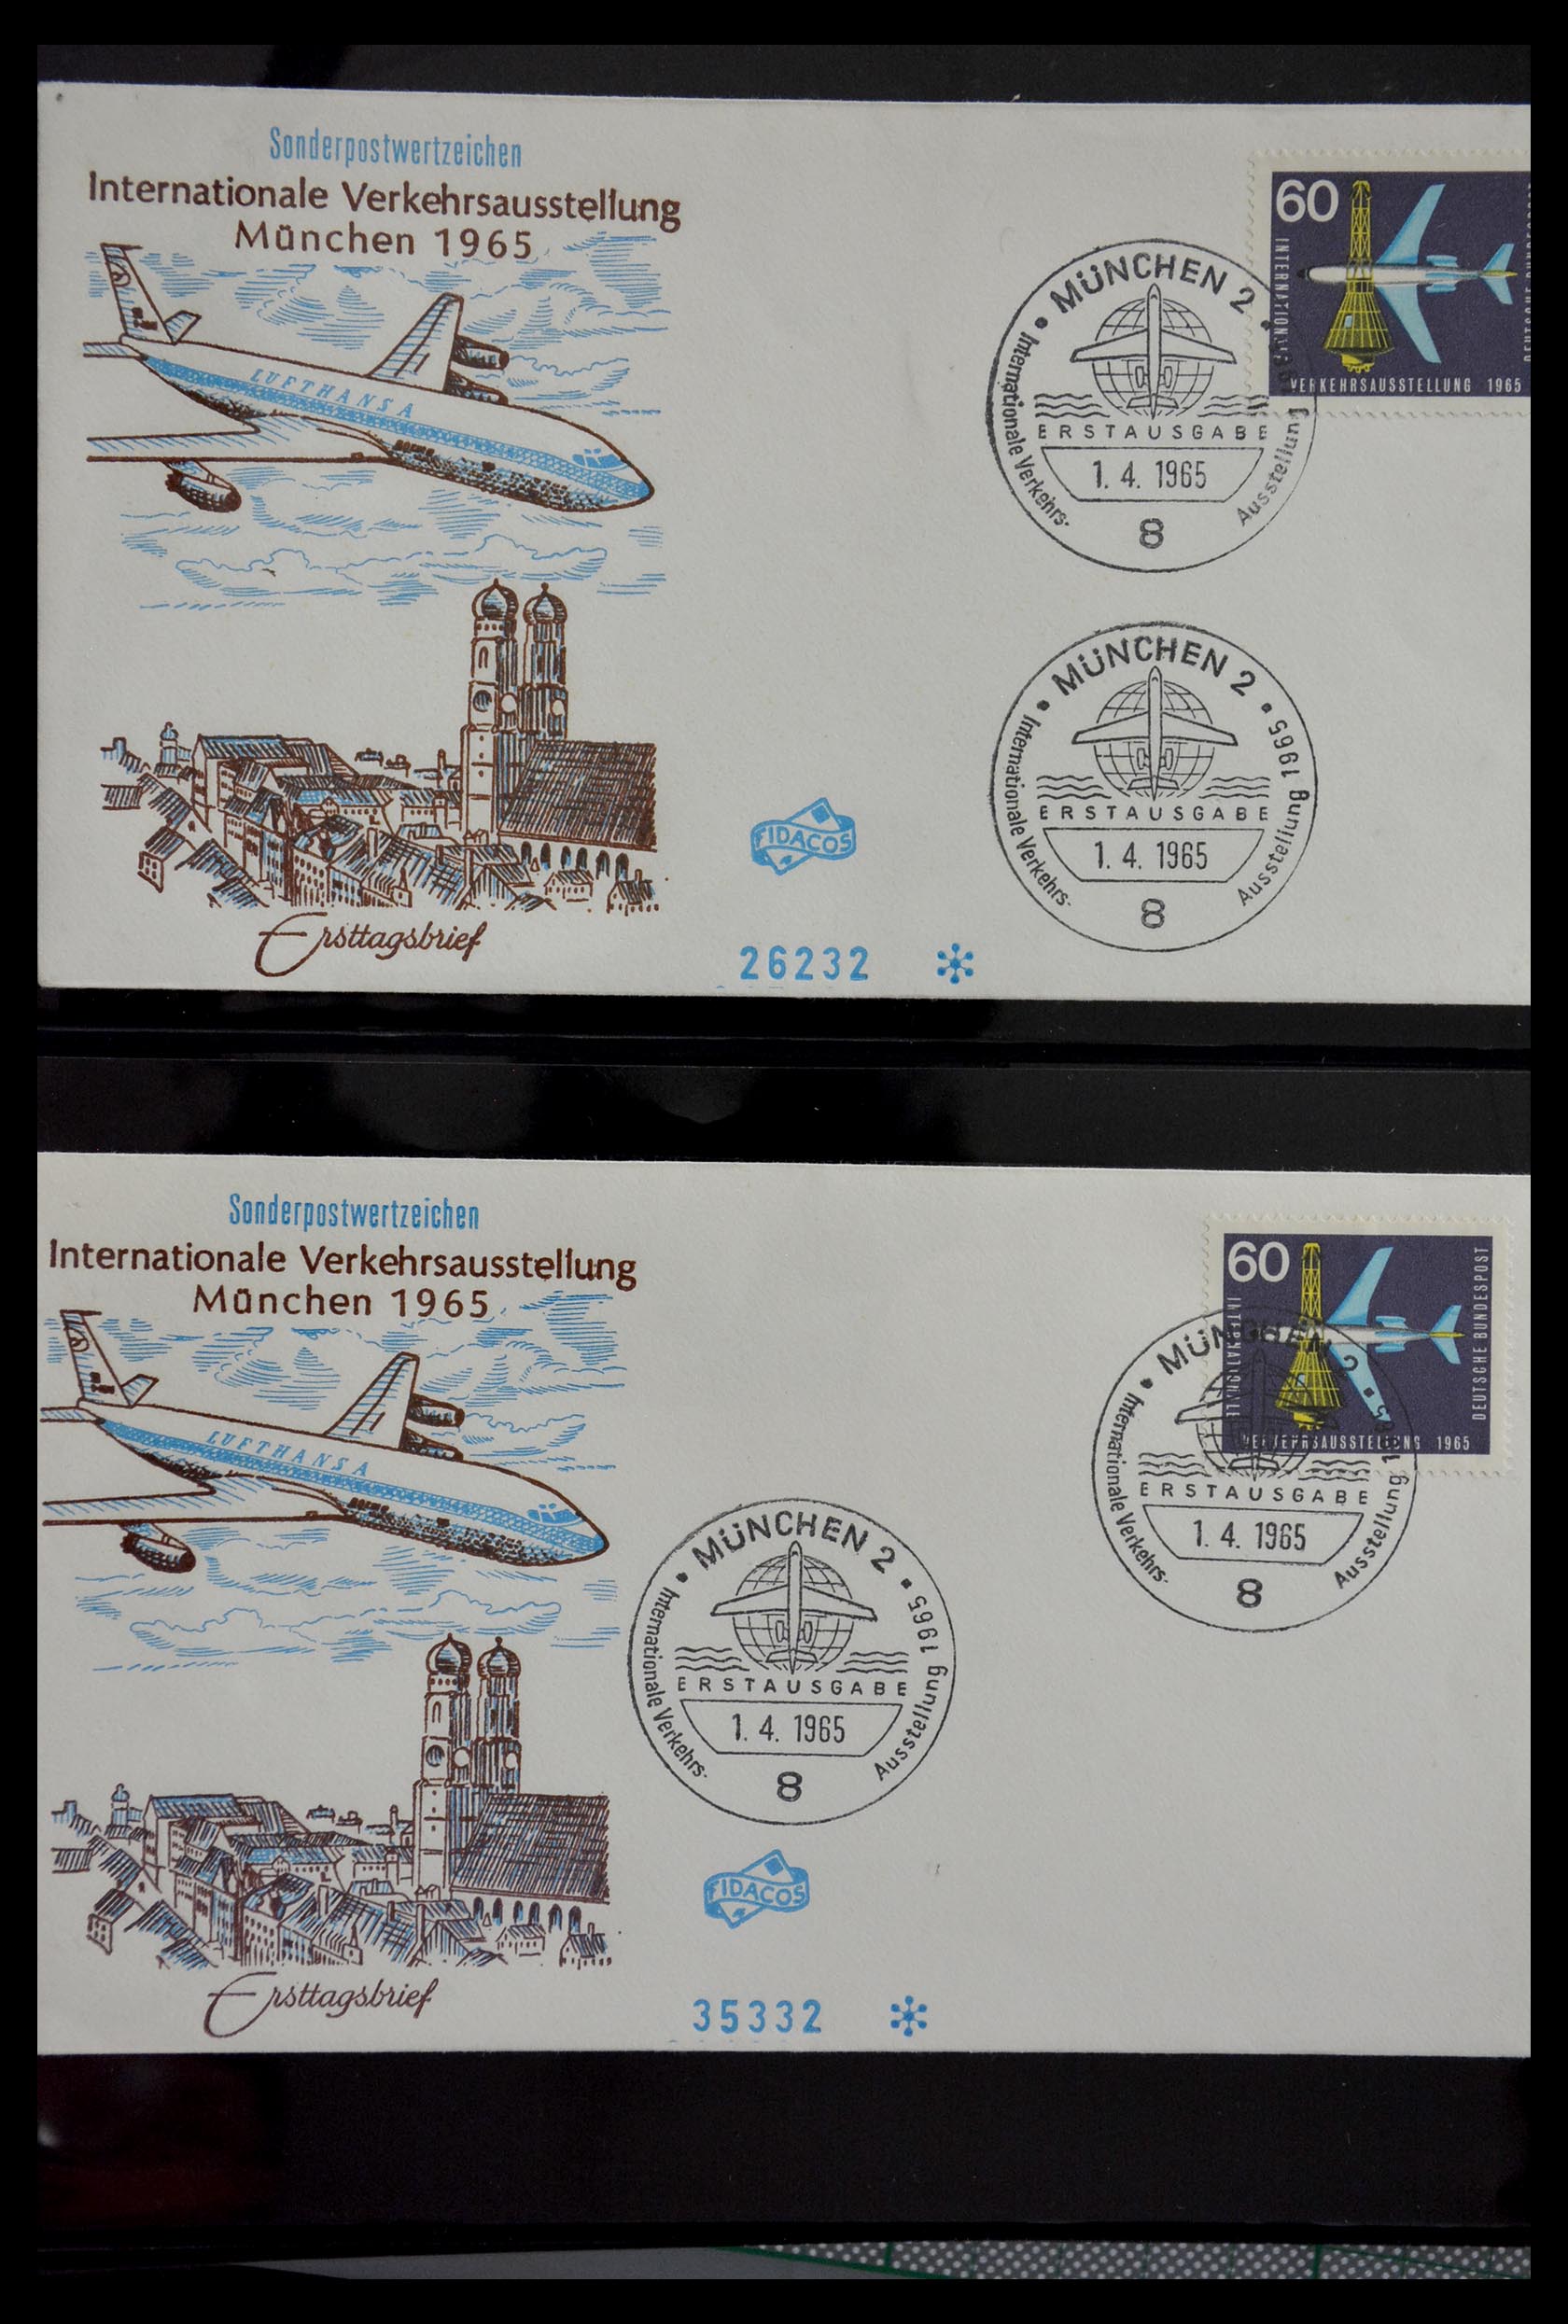 29382 038 - 29382 Germany covers and FDC's 1936-1965.